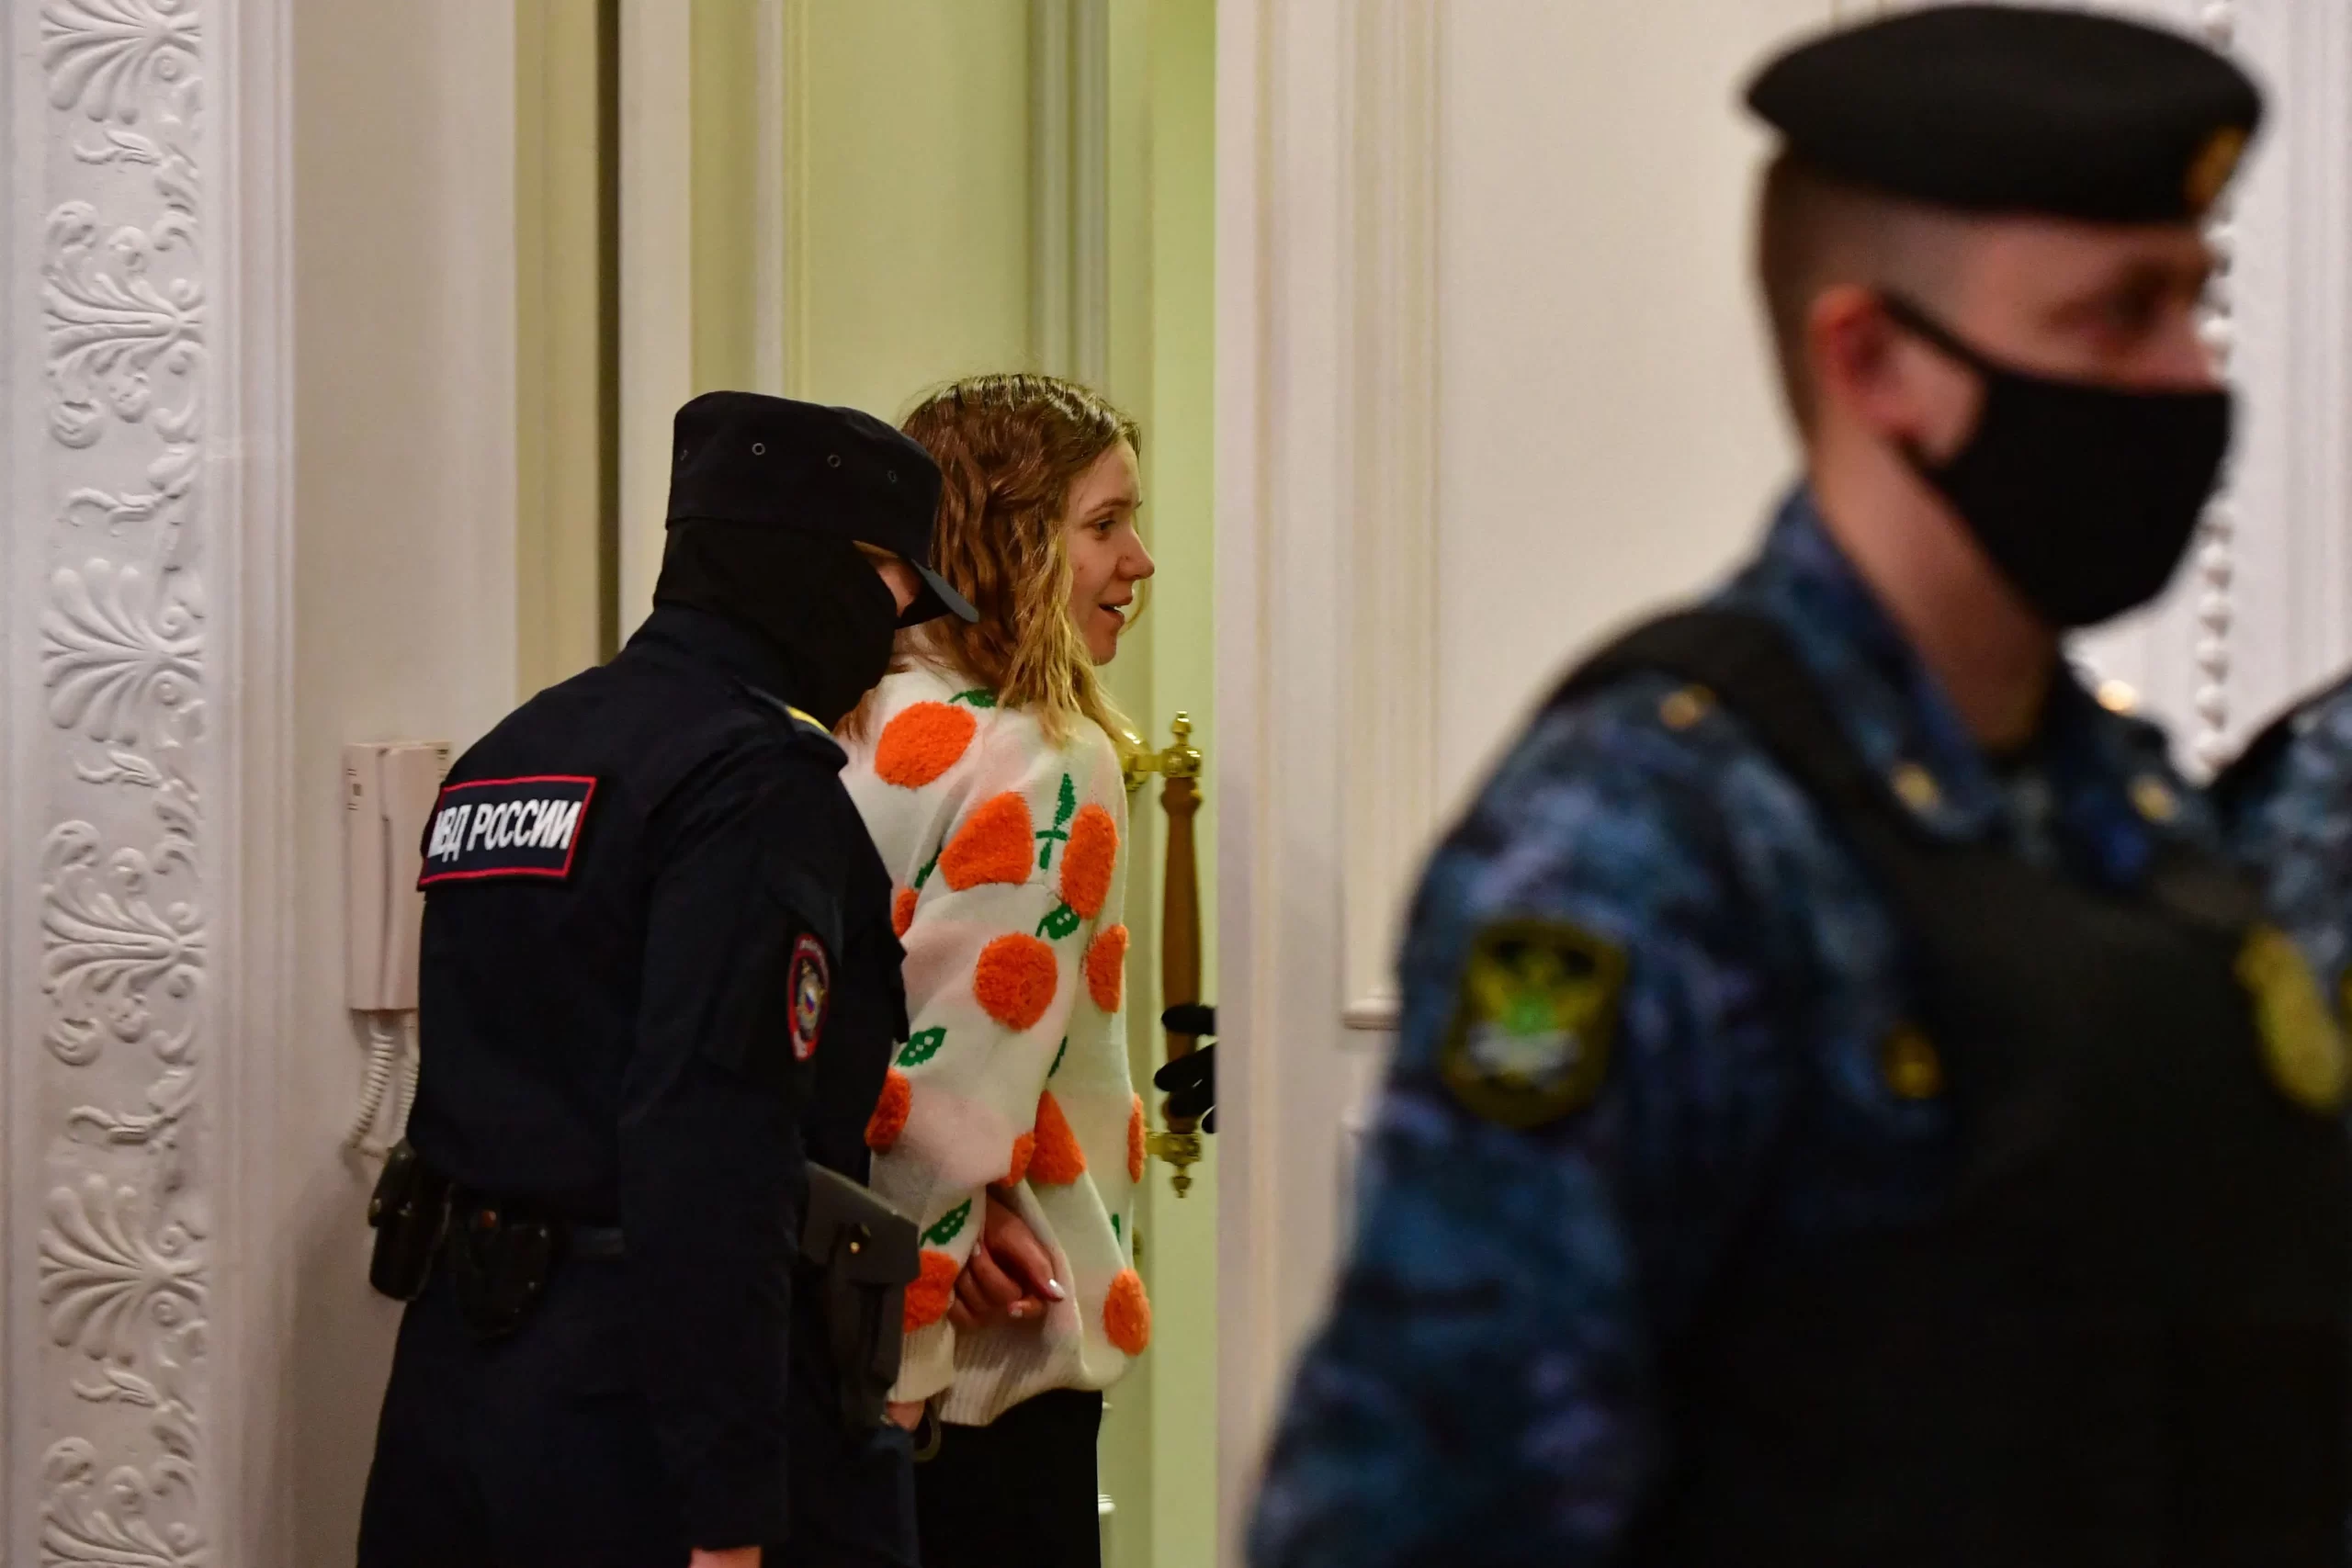 A Russian Court Sentences a Woman to 27 Years in Prison for the Killing of a Pro-kremlin Blogger